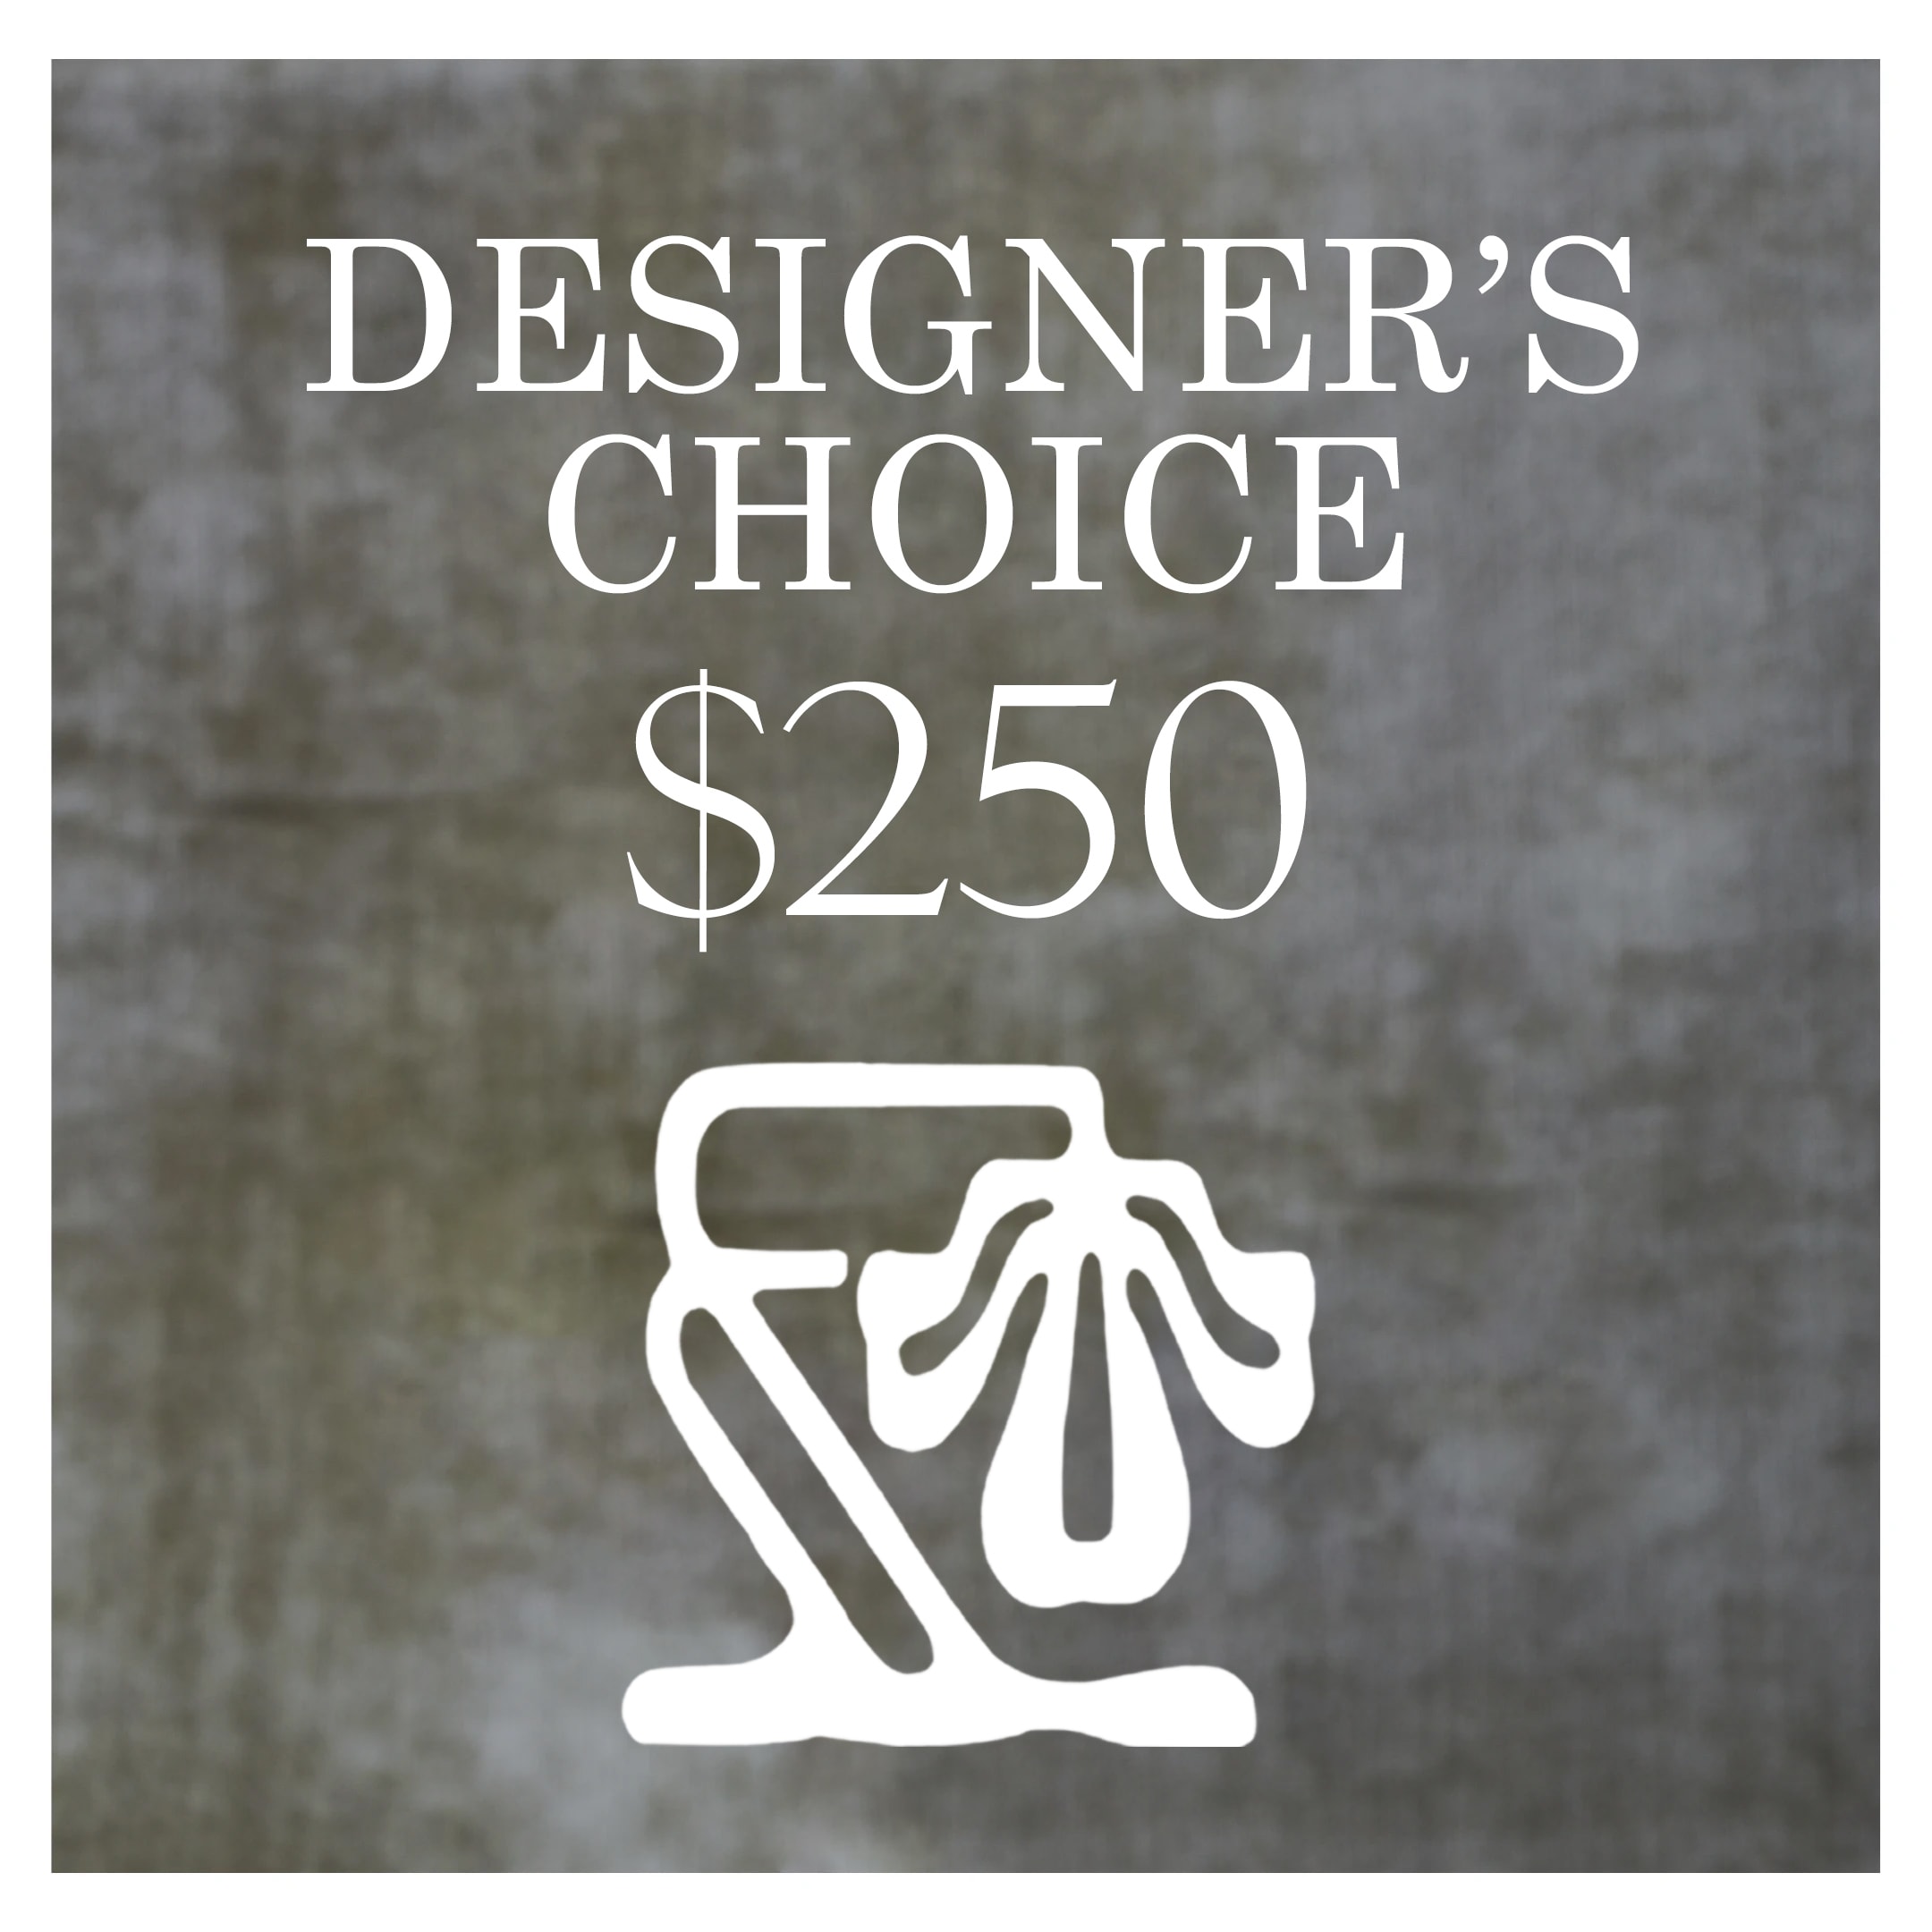 $250 -Designer’s Choice - We will design a beautiful arrangement. Please note any preferences such as: tall vs. short, colorful vs. neutral, and specific flowers or colors.